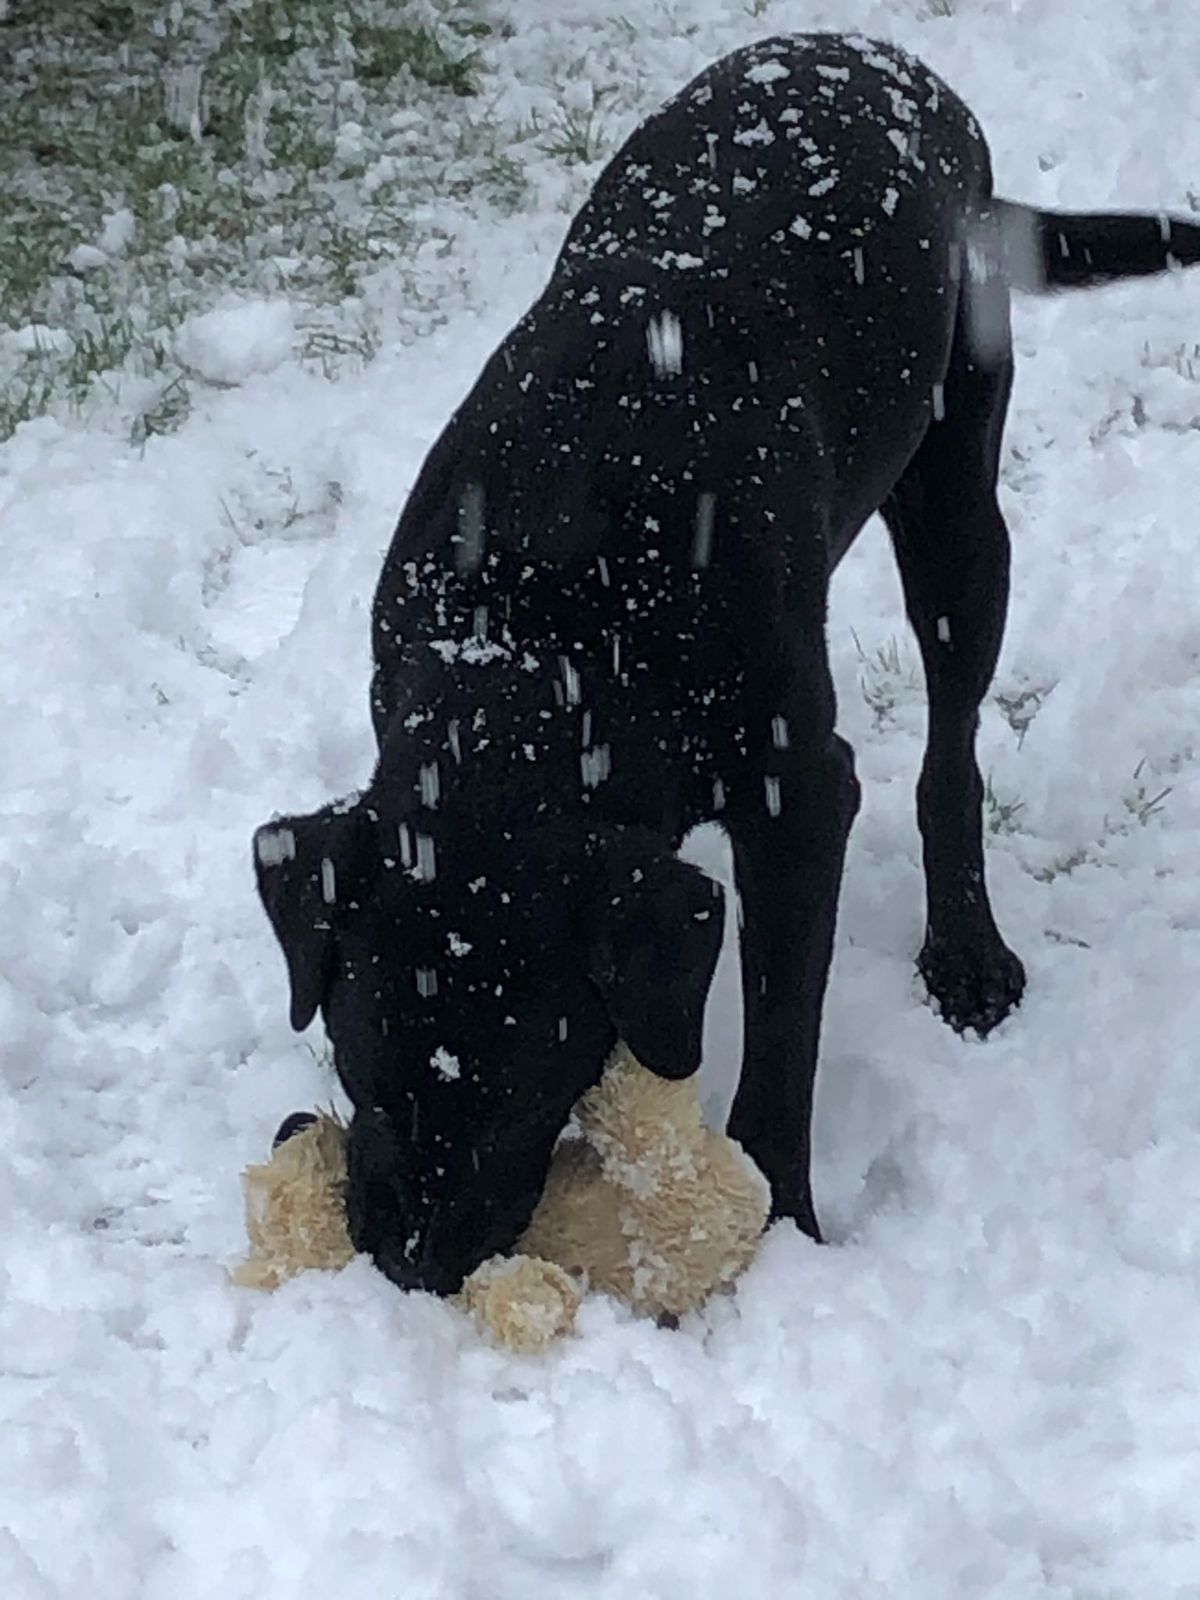 black dog playing with a brown teddy bear in the snow